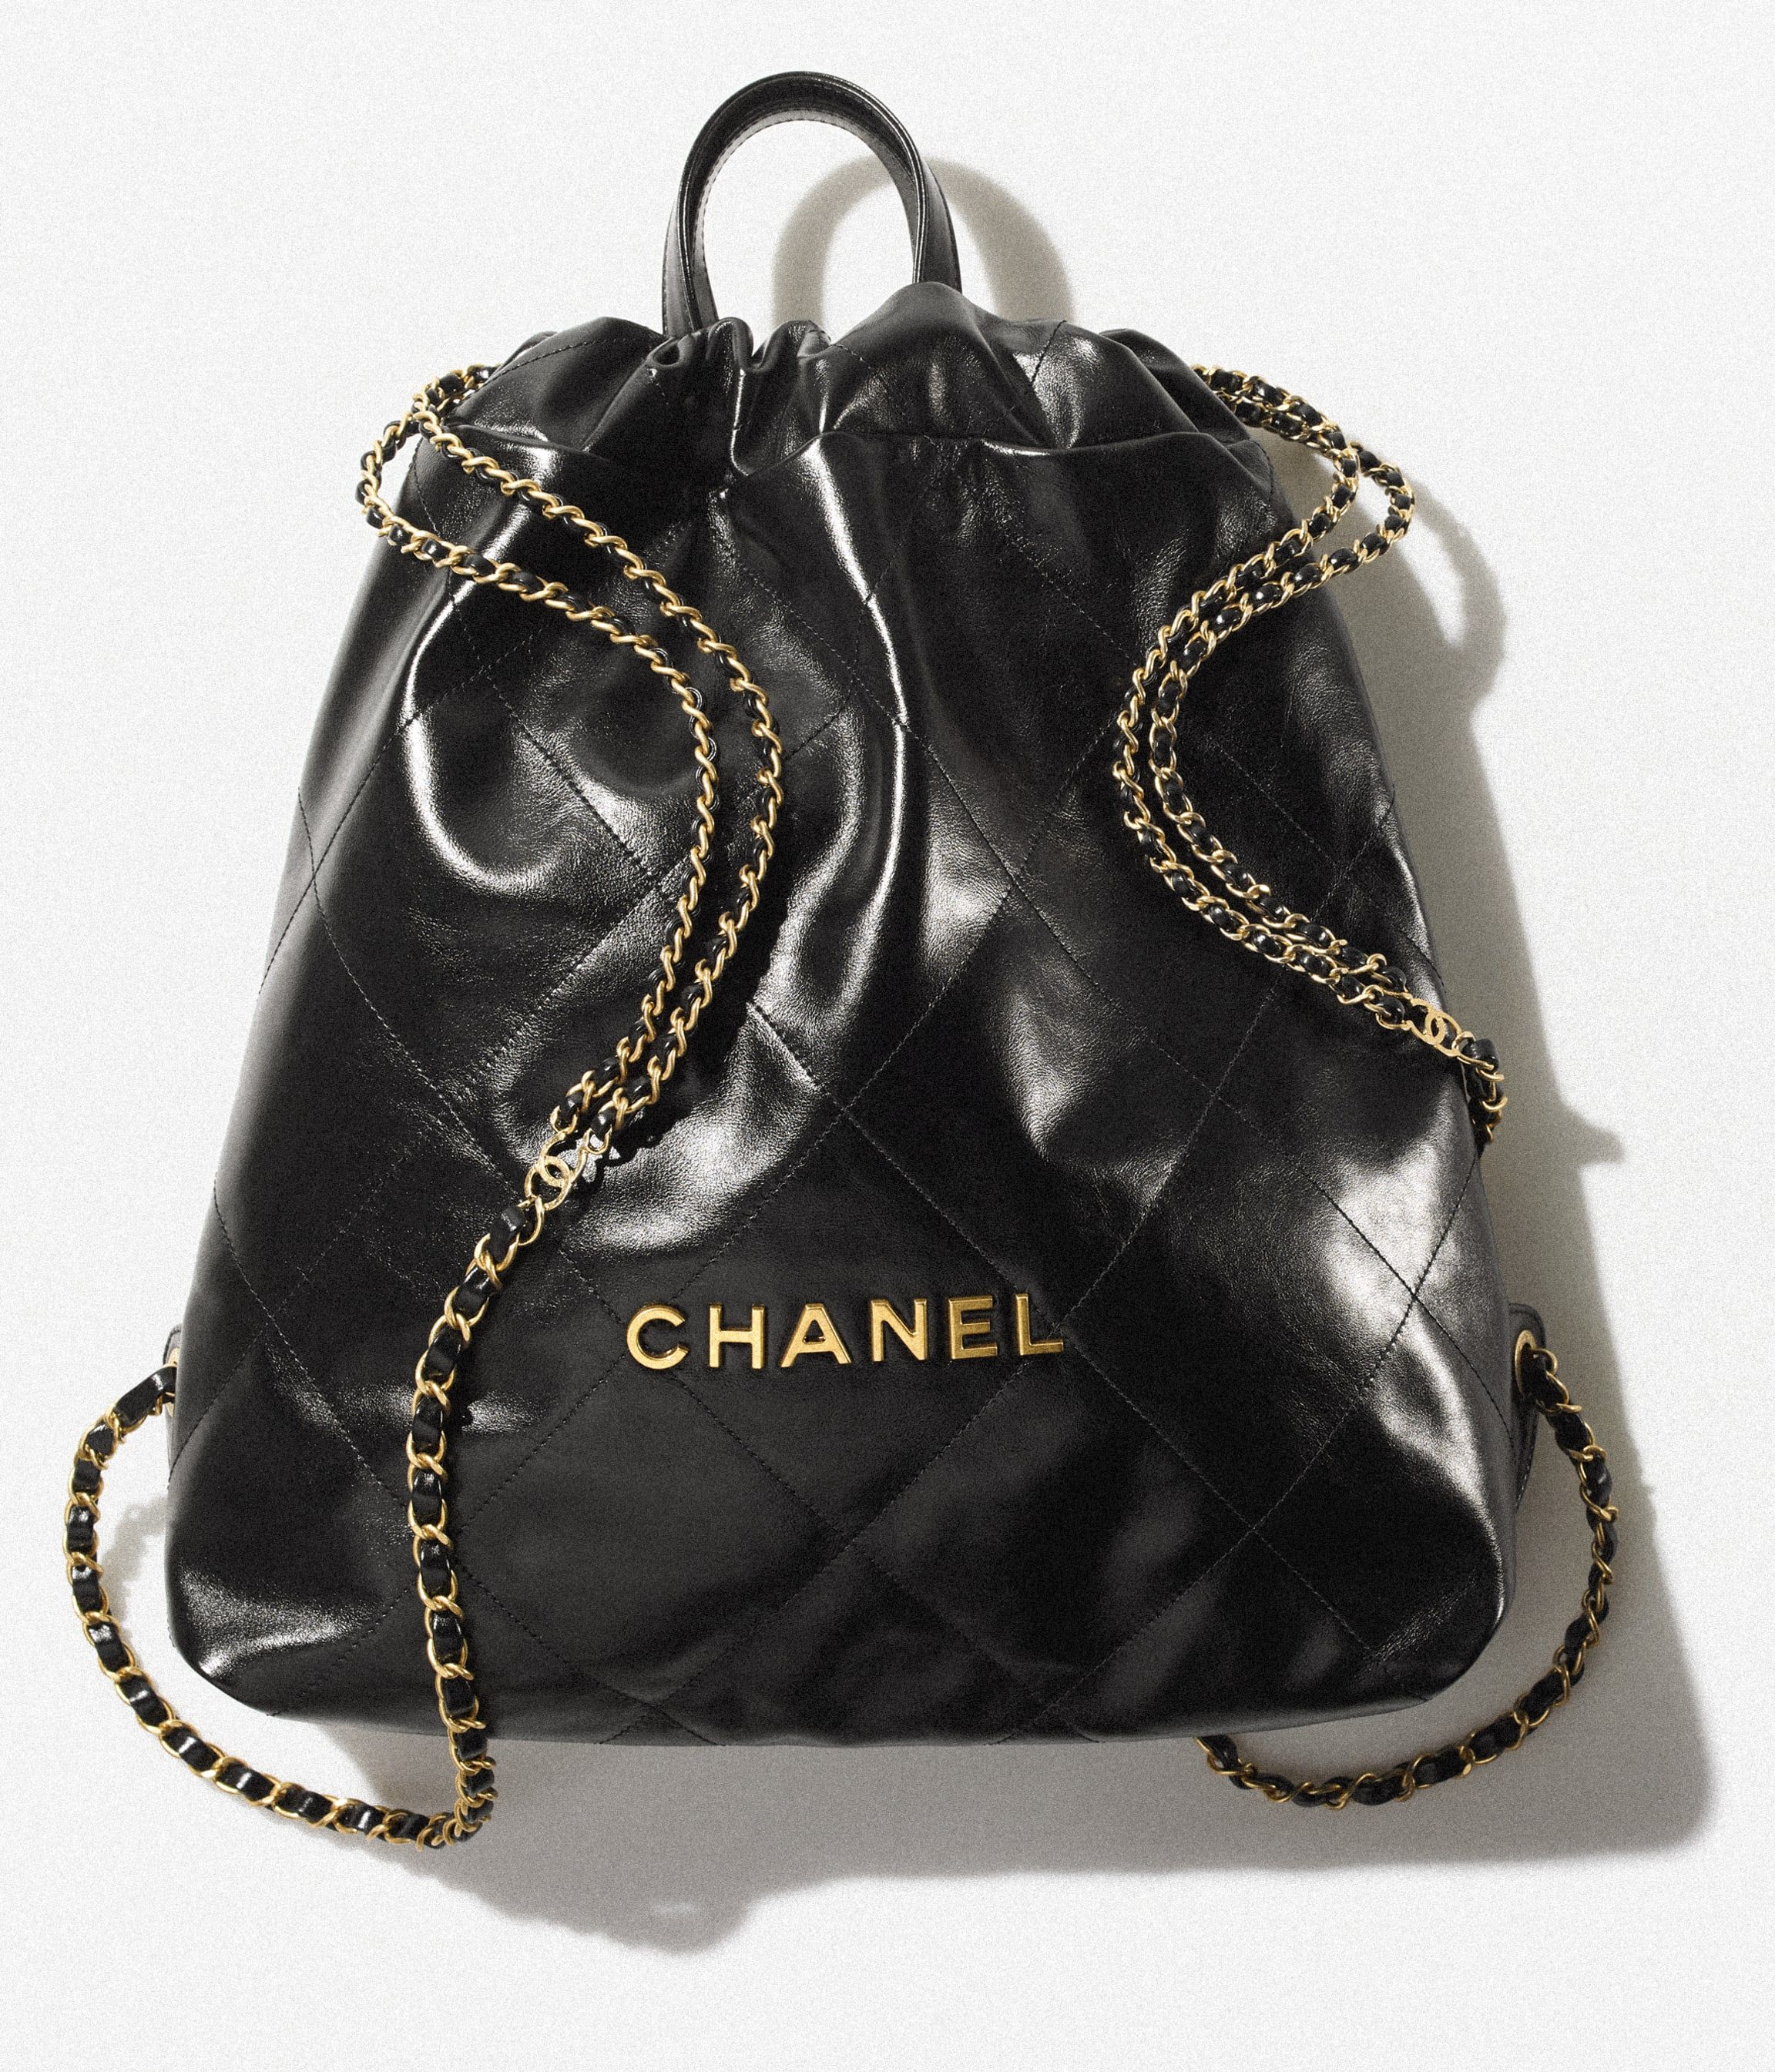 5 WAYS TO WEAR THE CHANEL JUMBO CLASSIC FLAP  ARE BIG BAGS COMING BACK  JUMBO OUTDATED  YouTube